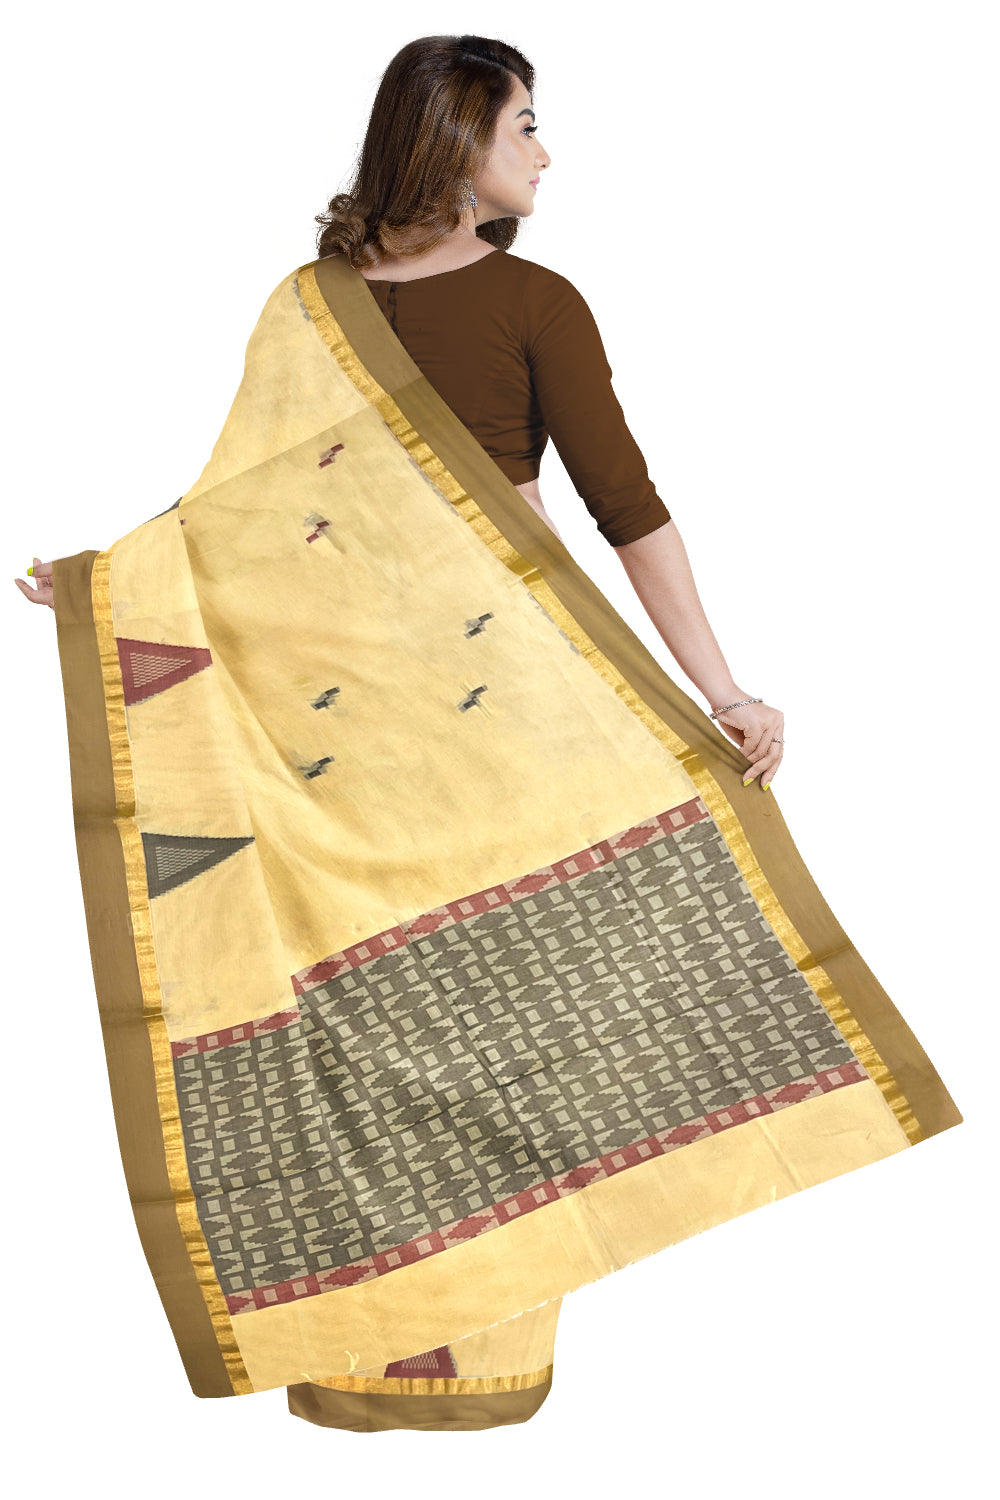 Southloom Light Brown Cotton Saree with Woven Designs